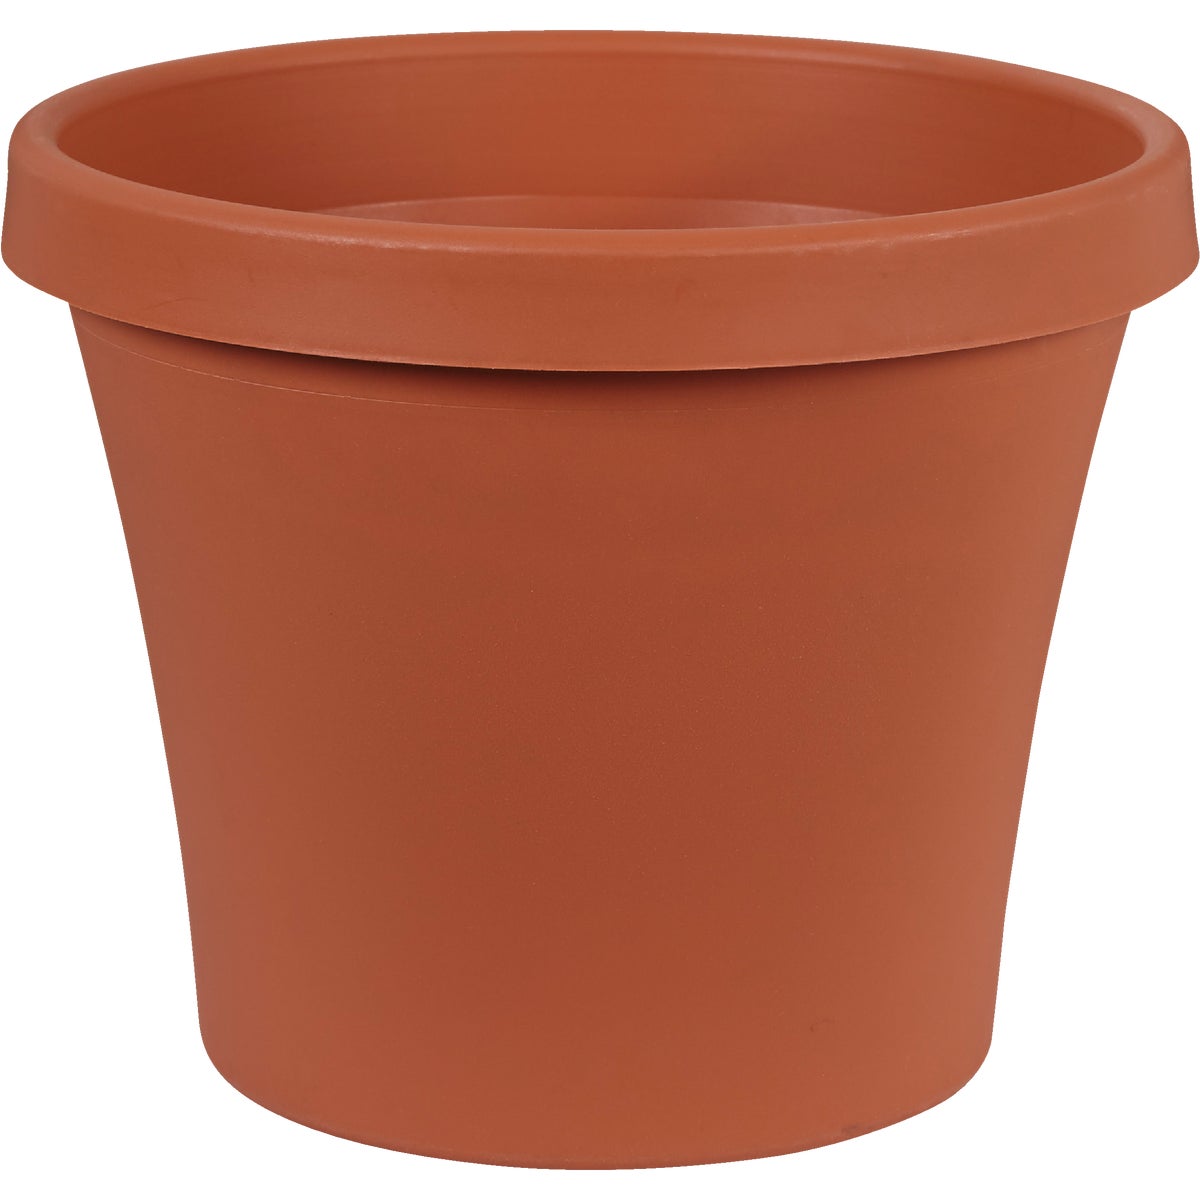 Item 717274, With a traditional design and natural colors, classic pots are a timeless 